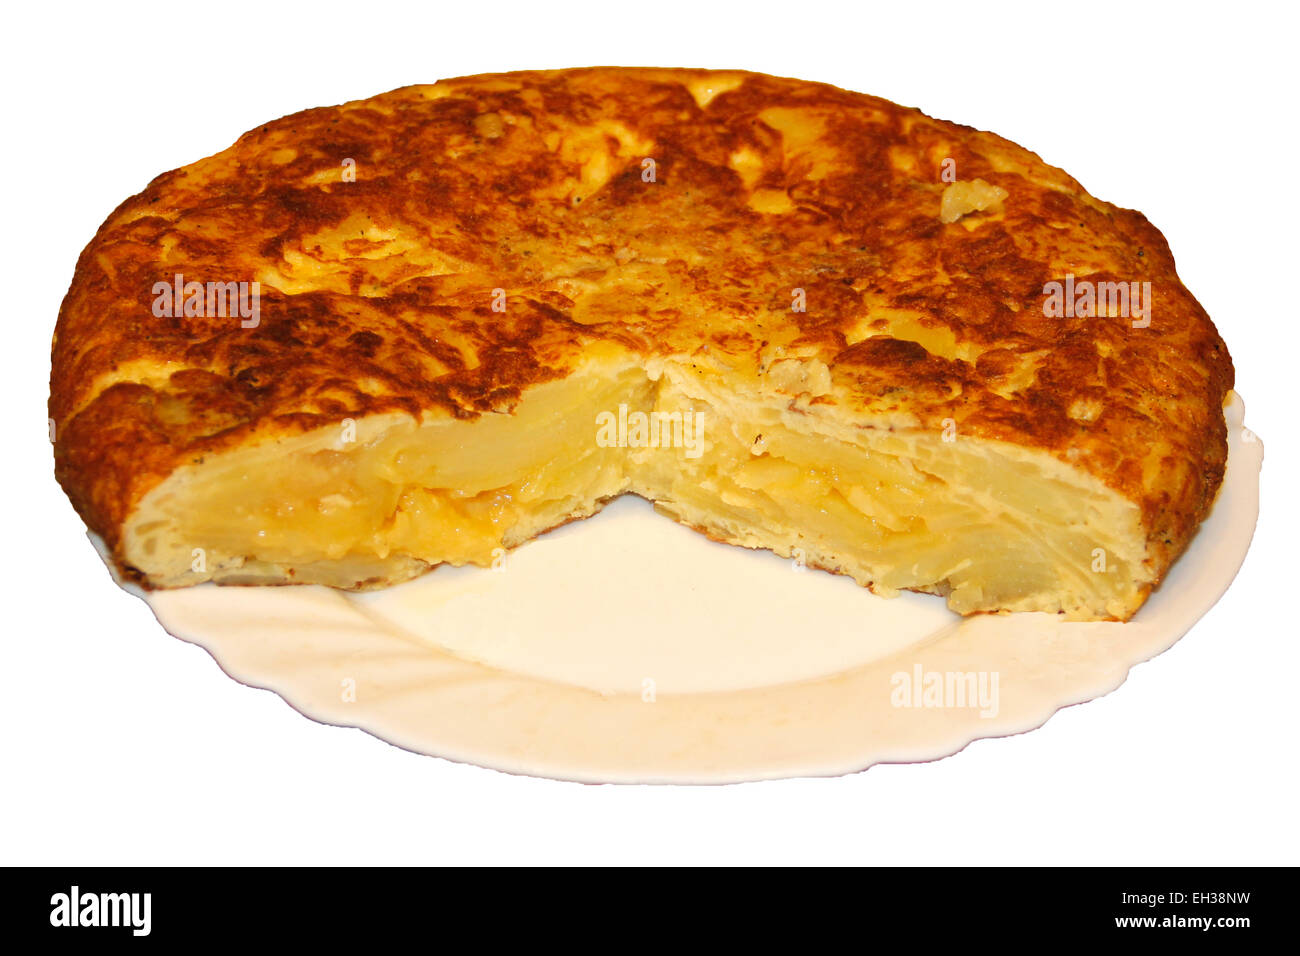 Opened potato omelette spanish delicious food isolated on white Stock Photo